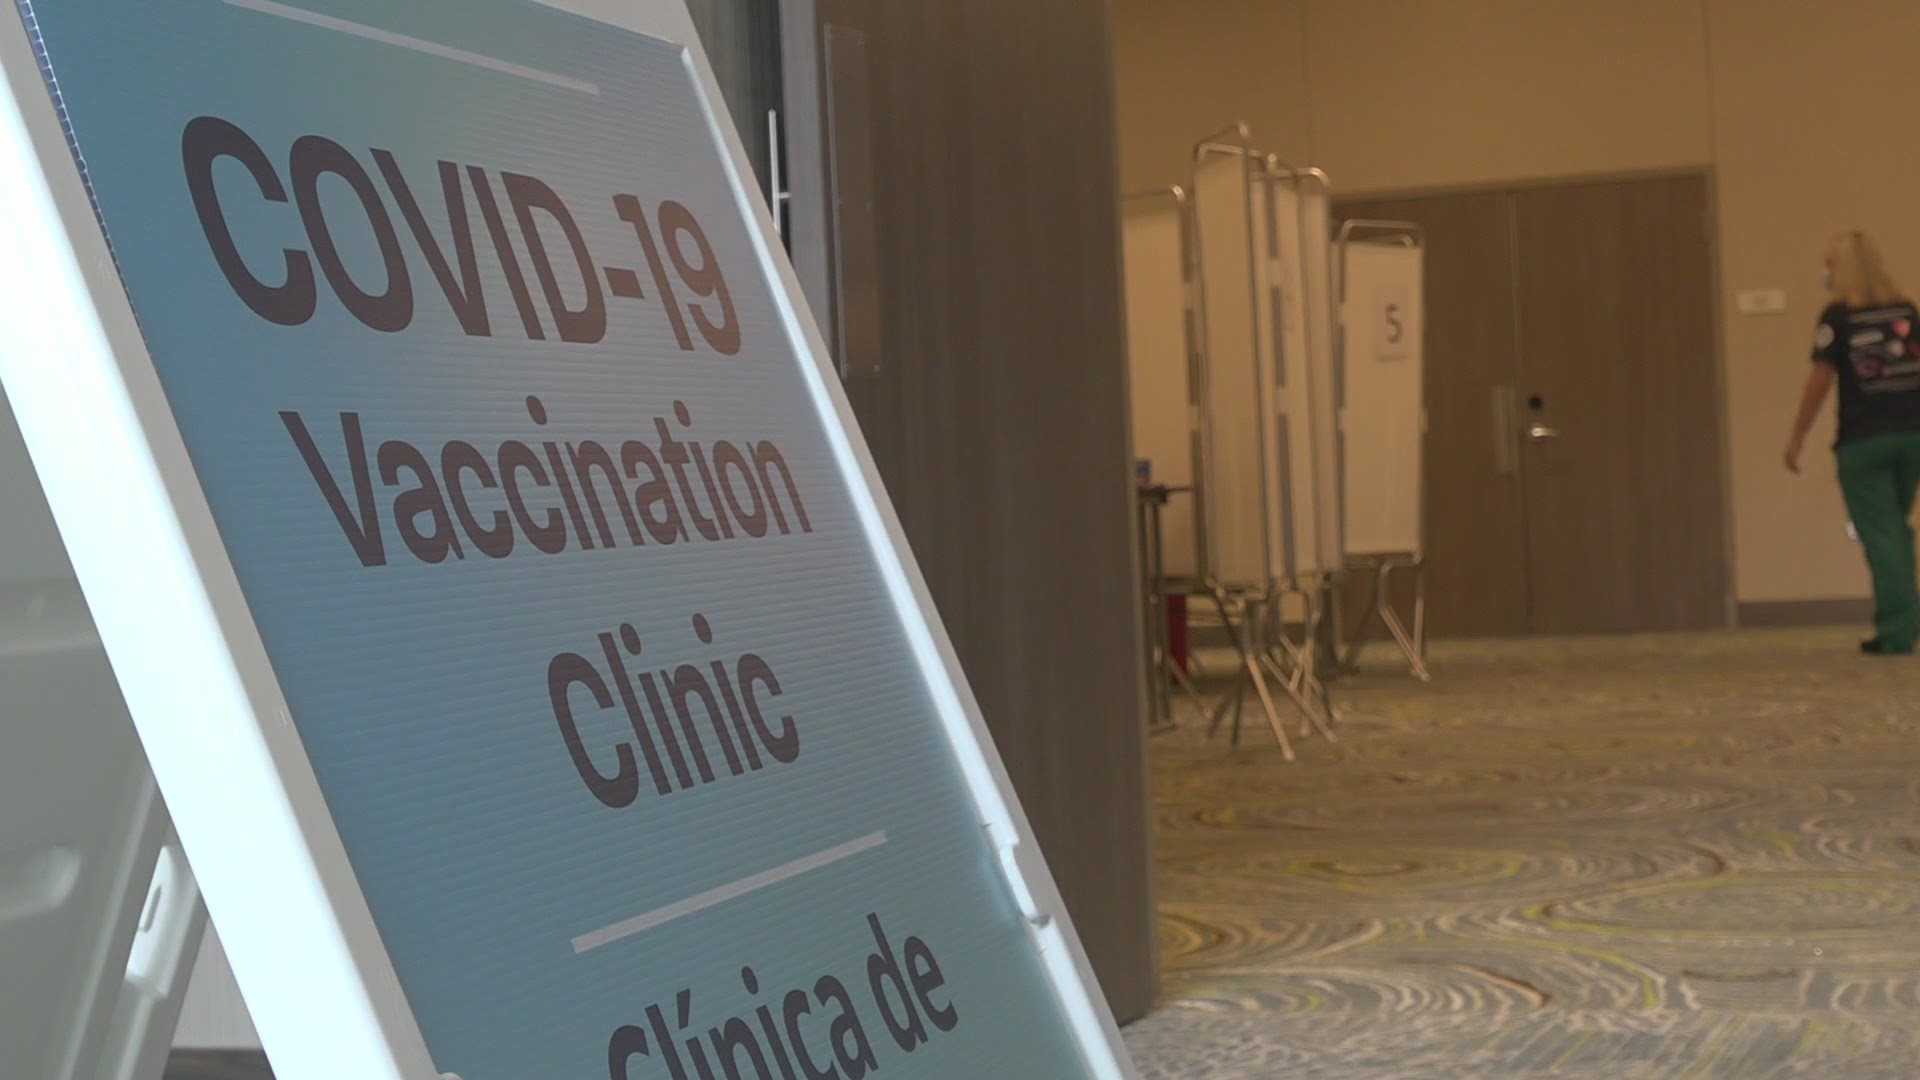 Only 24 people got vaccinated at the clinic, where the first 200 people were eligible to get a $50 Visa gift card.